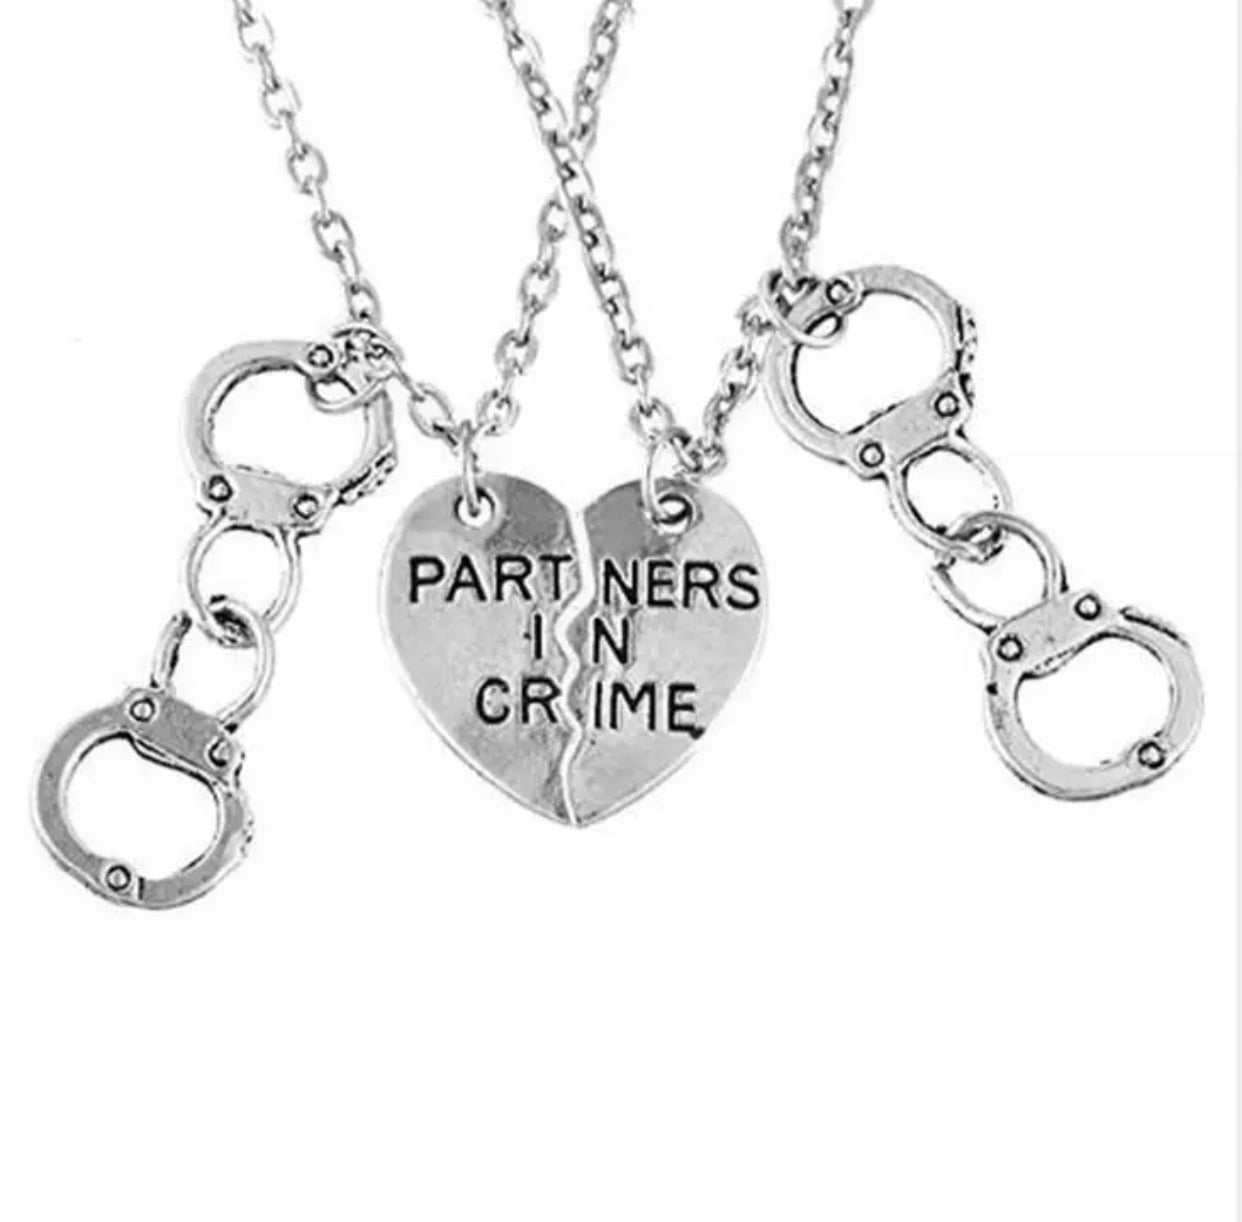 Partners in crime Necklace